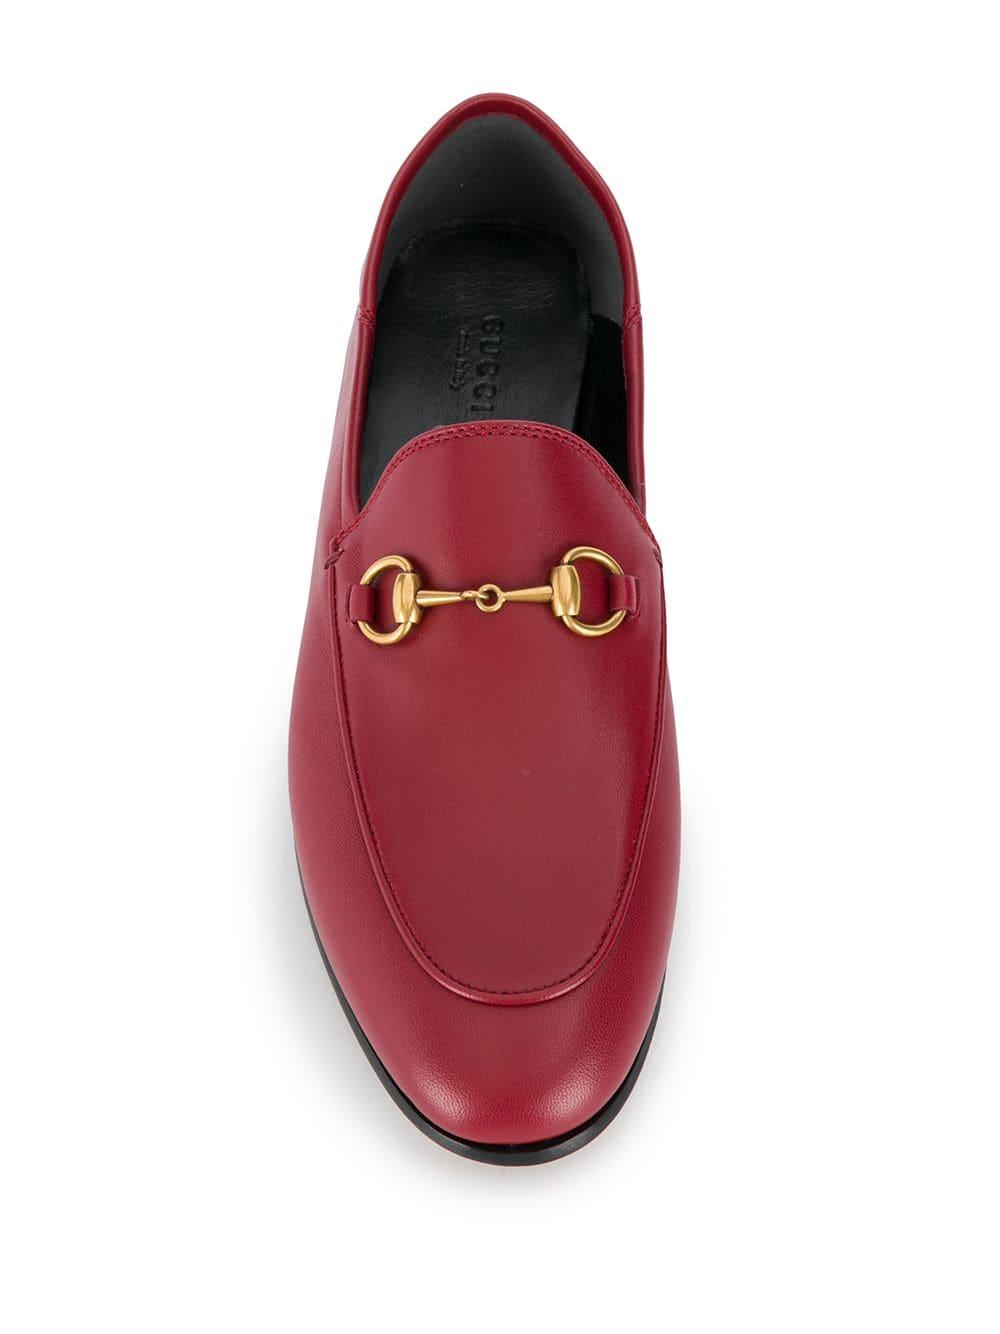 Gucci Leather Brixton Horsebit Loafers in Red - Lyst